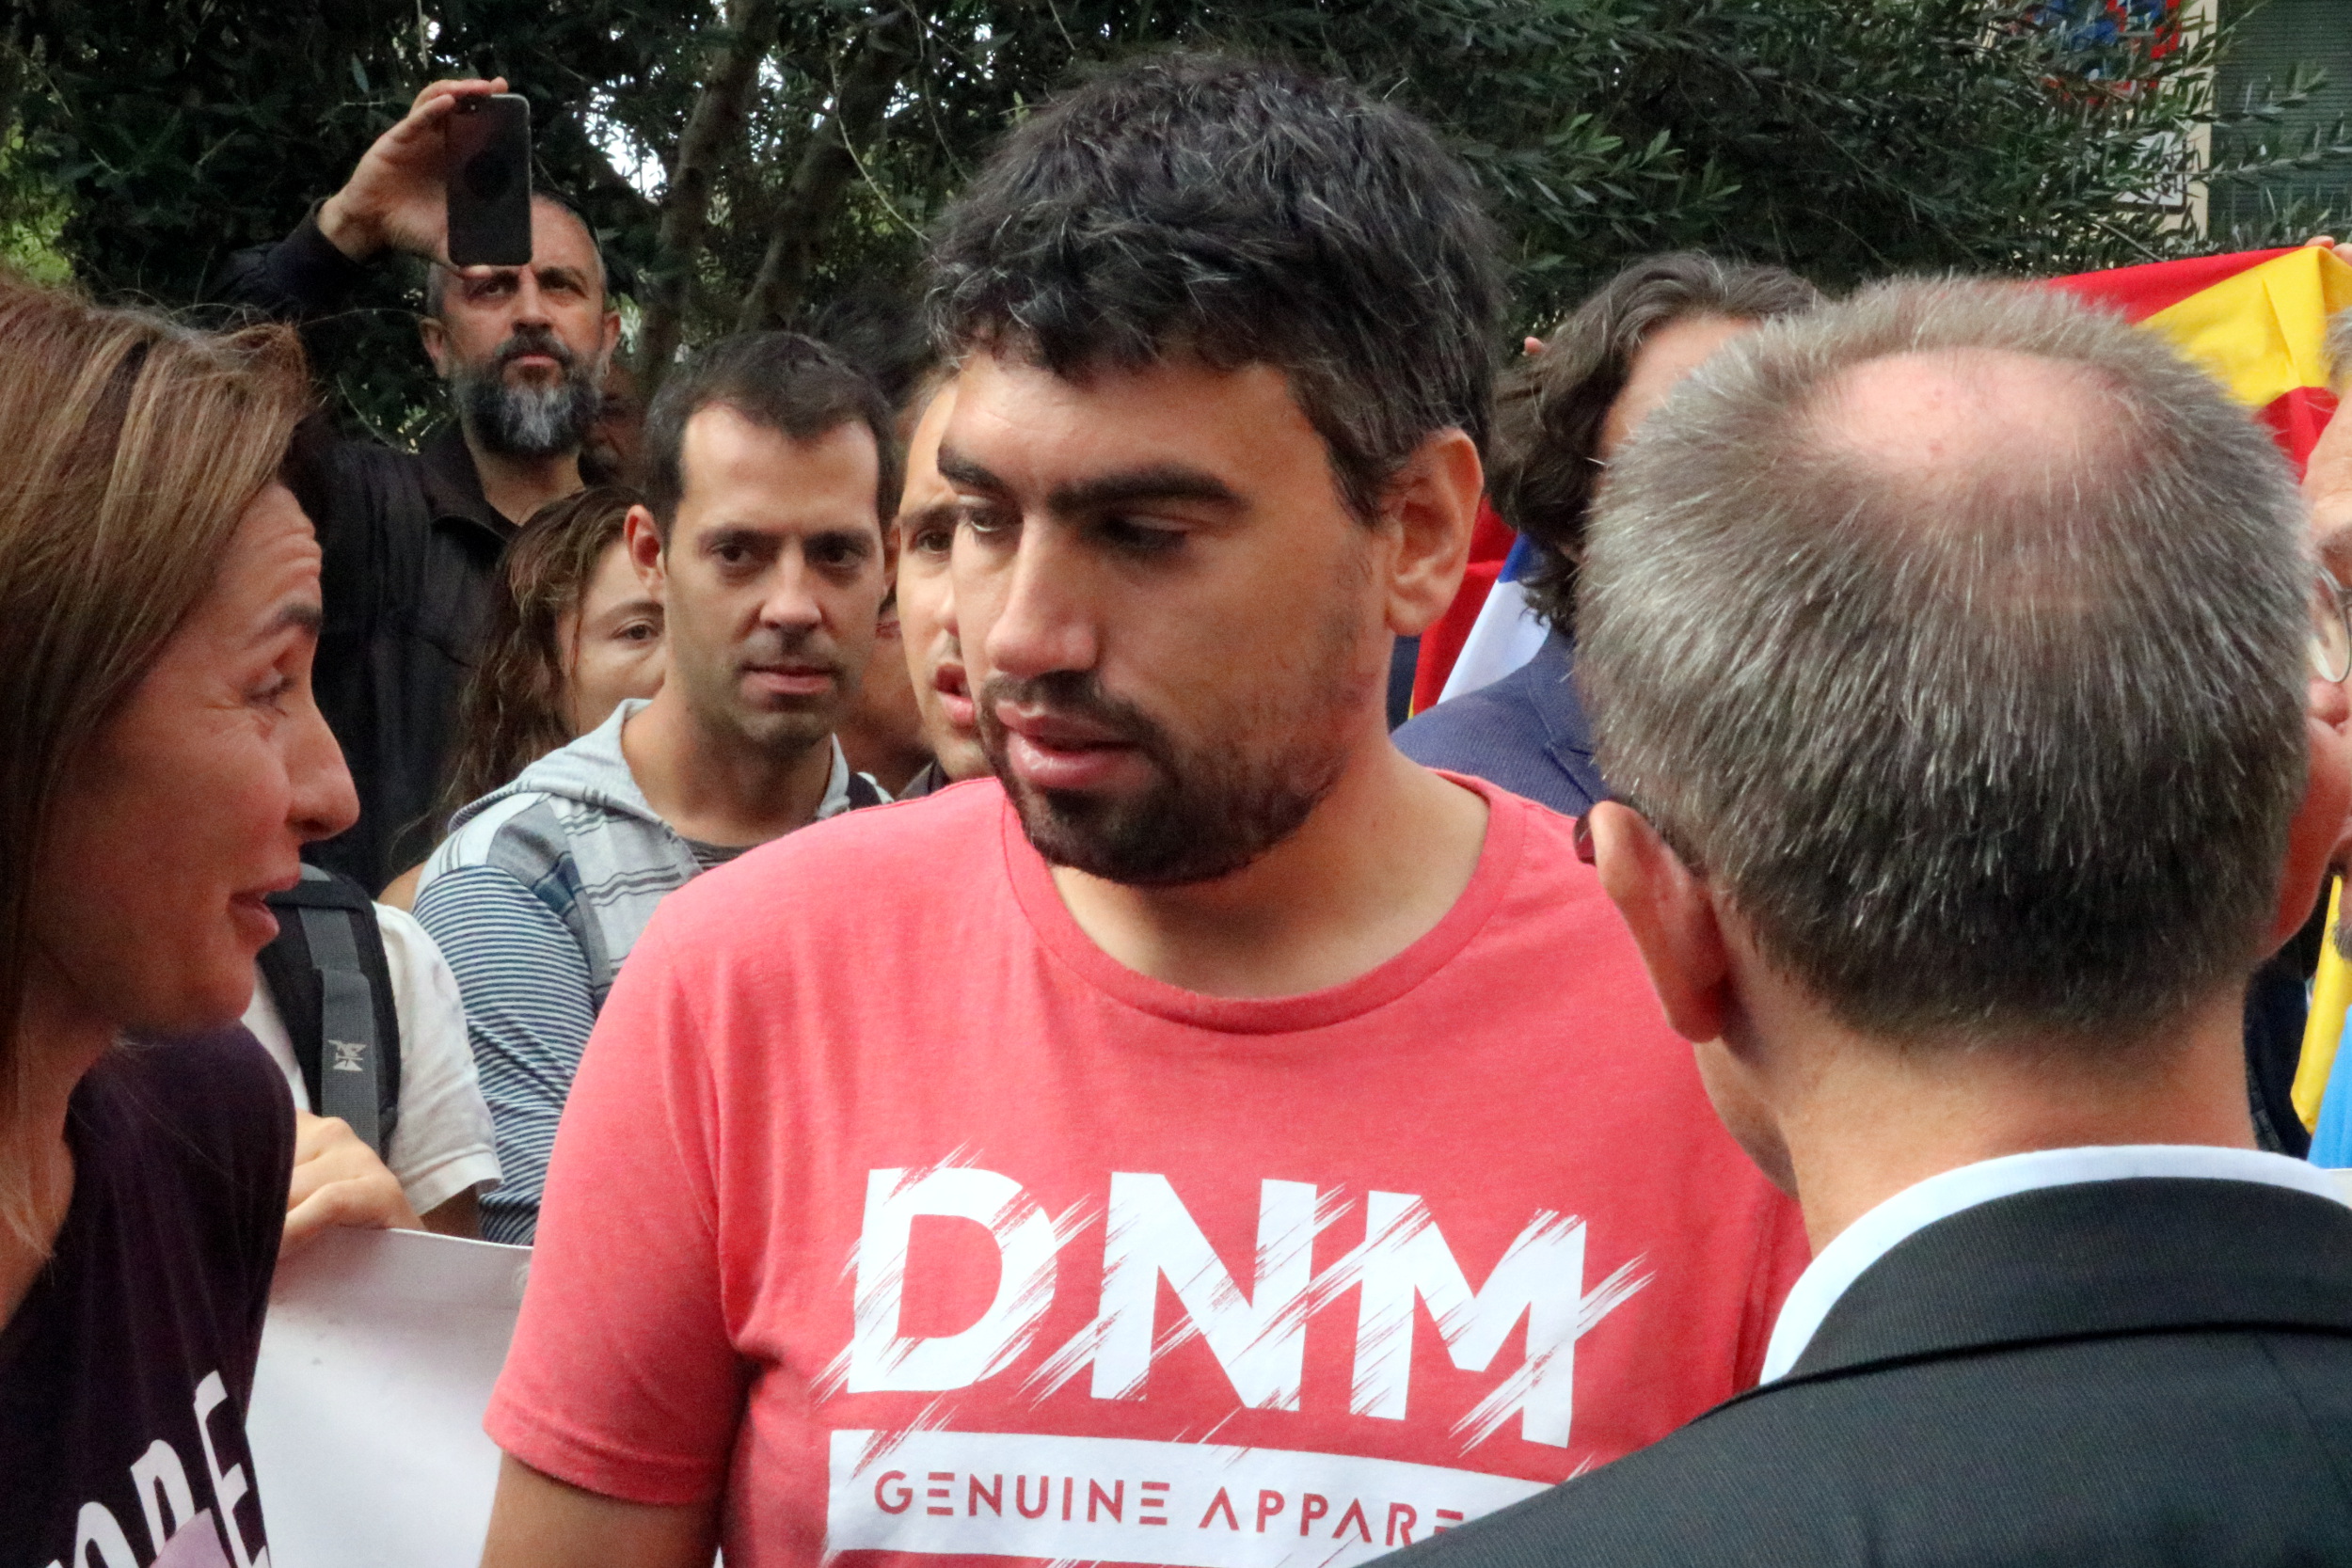 Marc Ruiz, one of the individuals summoned to the Spanish Guardia Civil police station for duplicating the referendum website (by ACN)